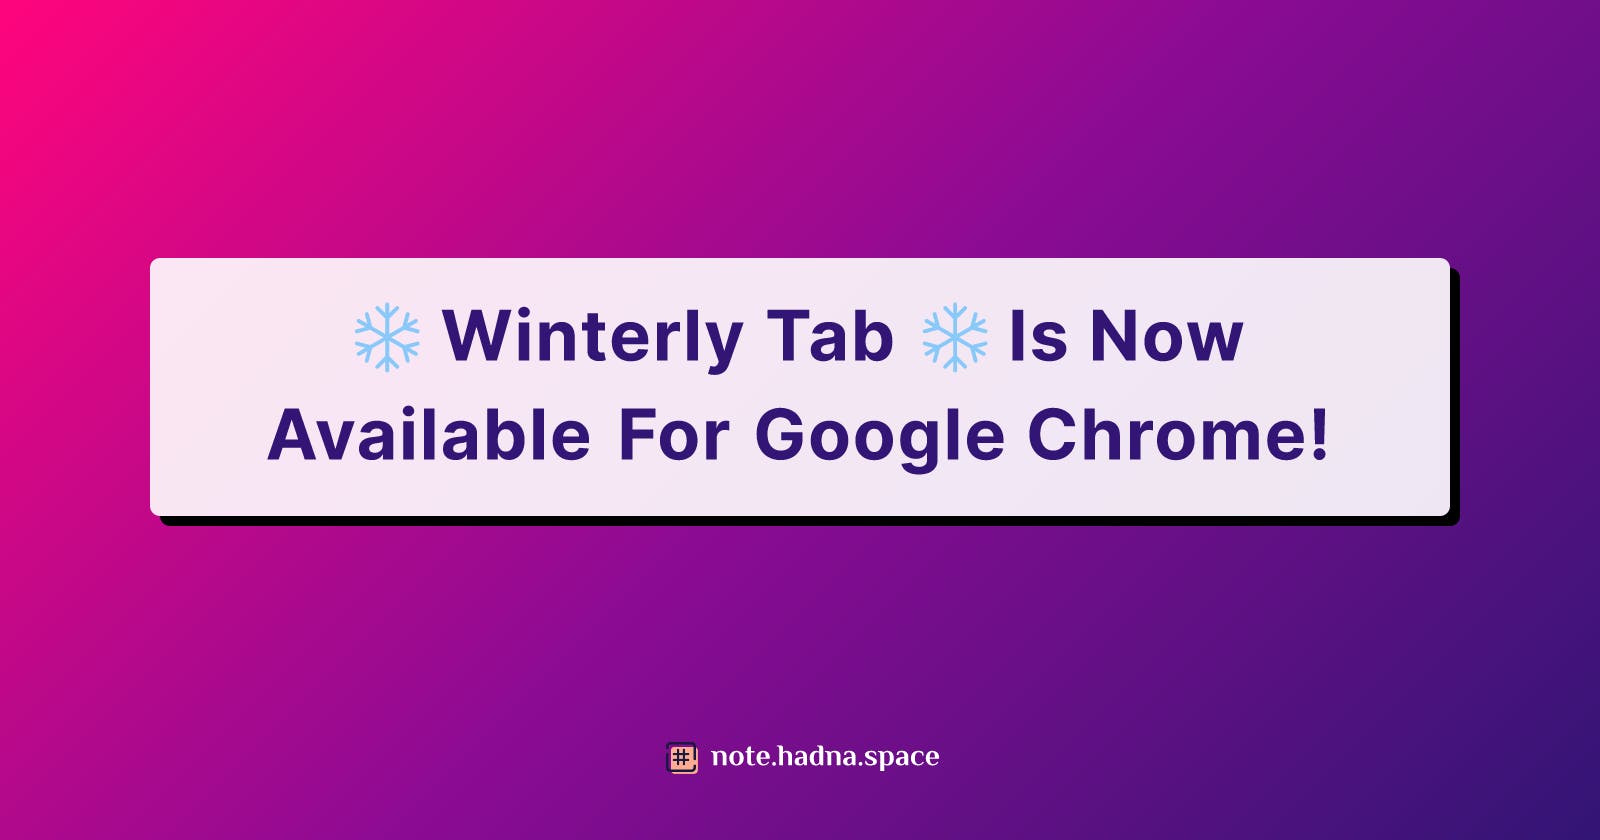 ❄️ Winterly Tab ❄️ Is Now Available For Google Chrome!